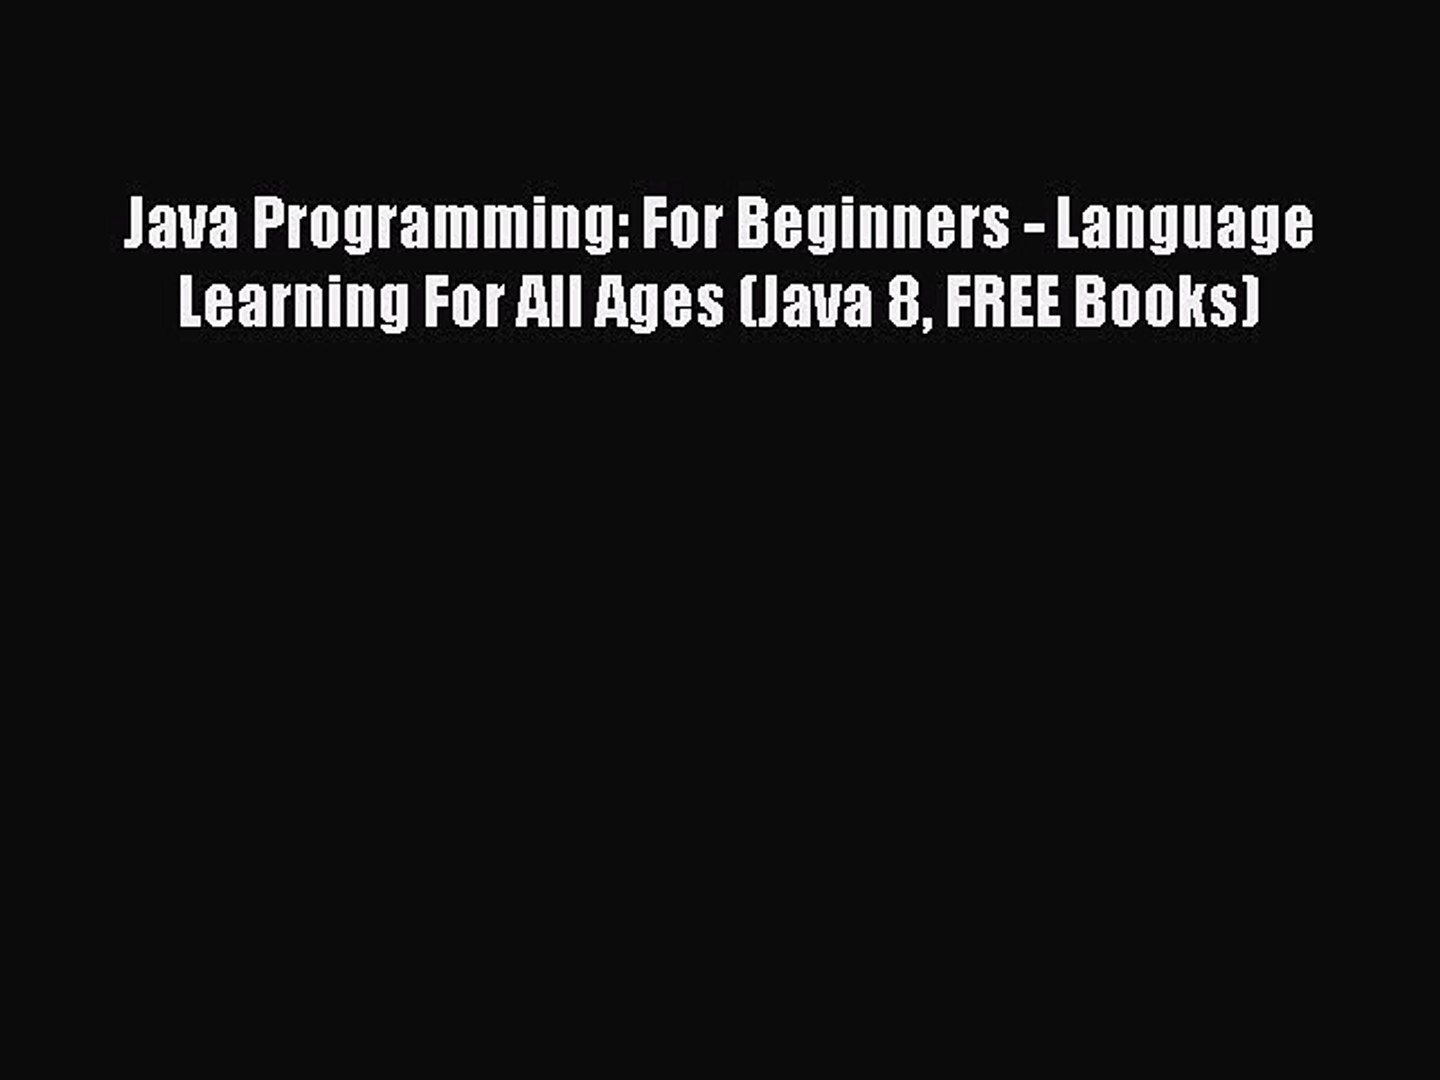 Read Java Programming: For Beginners - Language Learning For All Ages (Java 8 FREE Books) Ebook